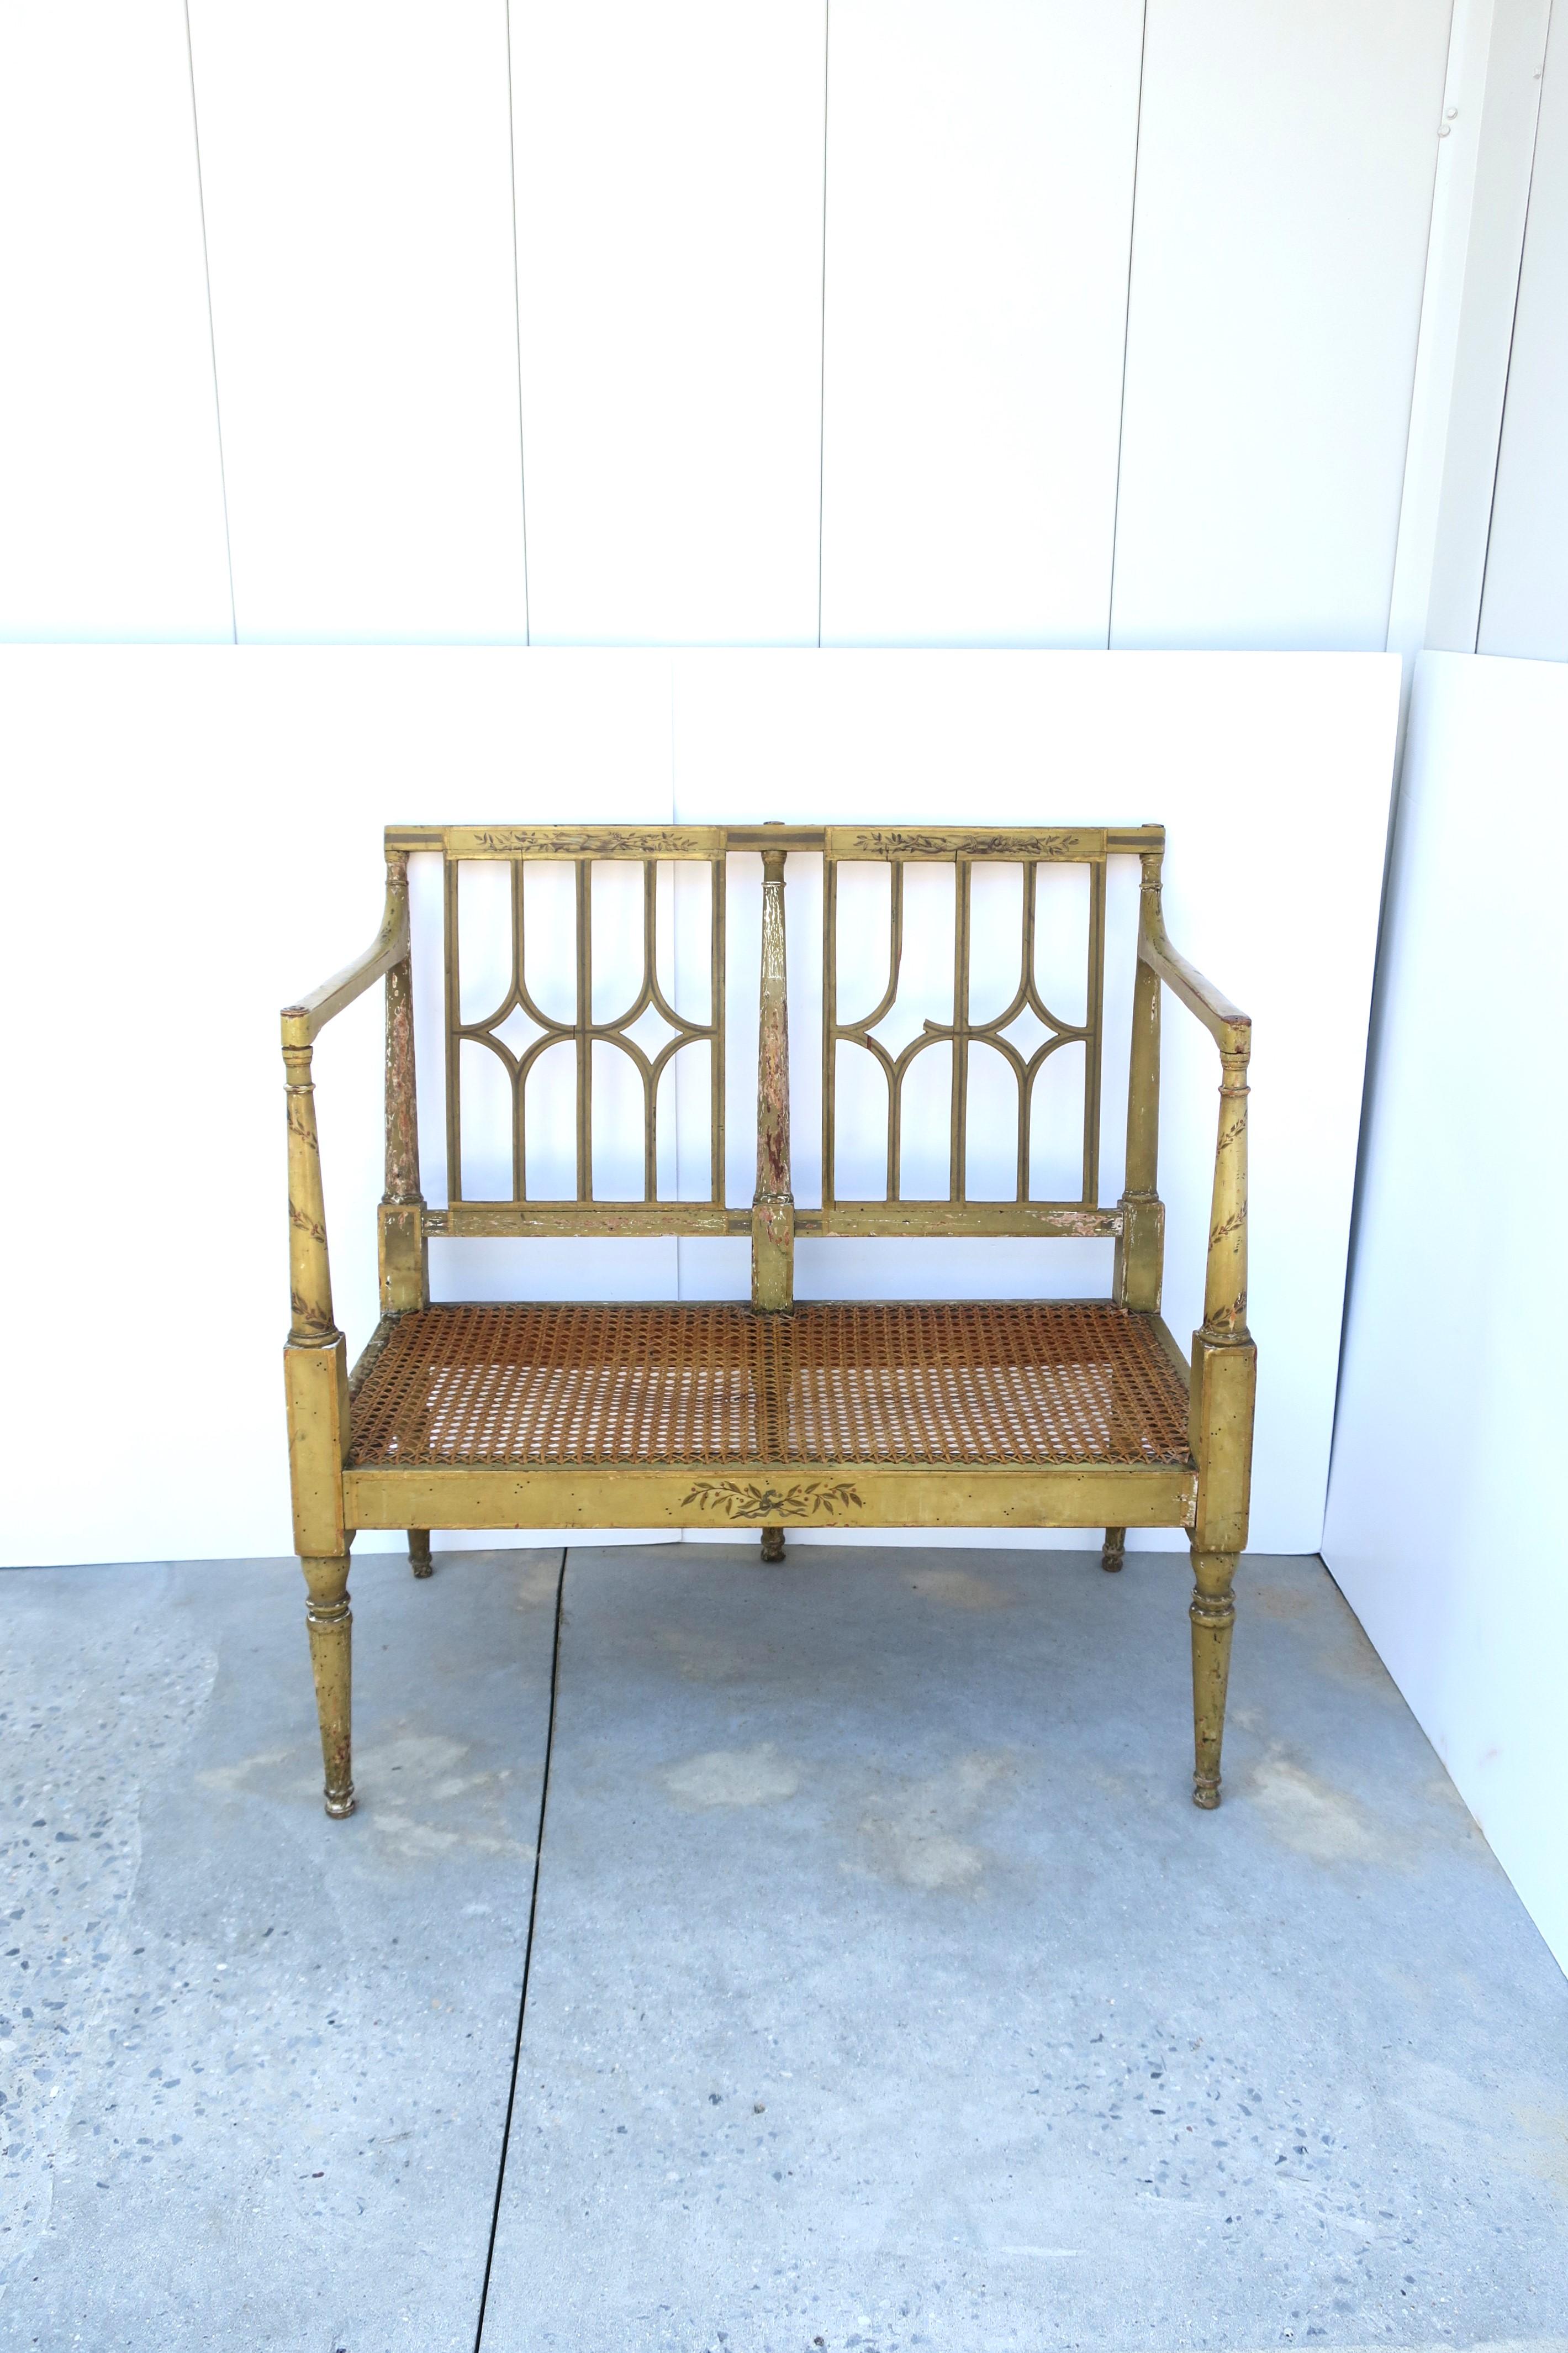 A painted and distressed wood and cane wicker loveseat bench, circa mid-20th century. Piece has a perforated back, high arms, cane seat, decorated accents, finished with an intentional distressed look. Seat height: 13.75